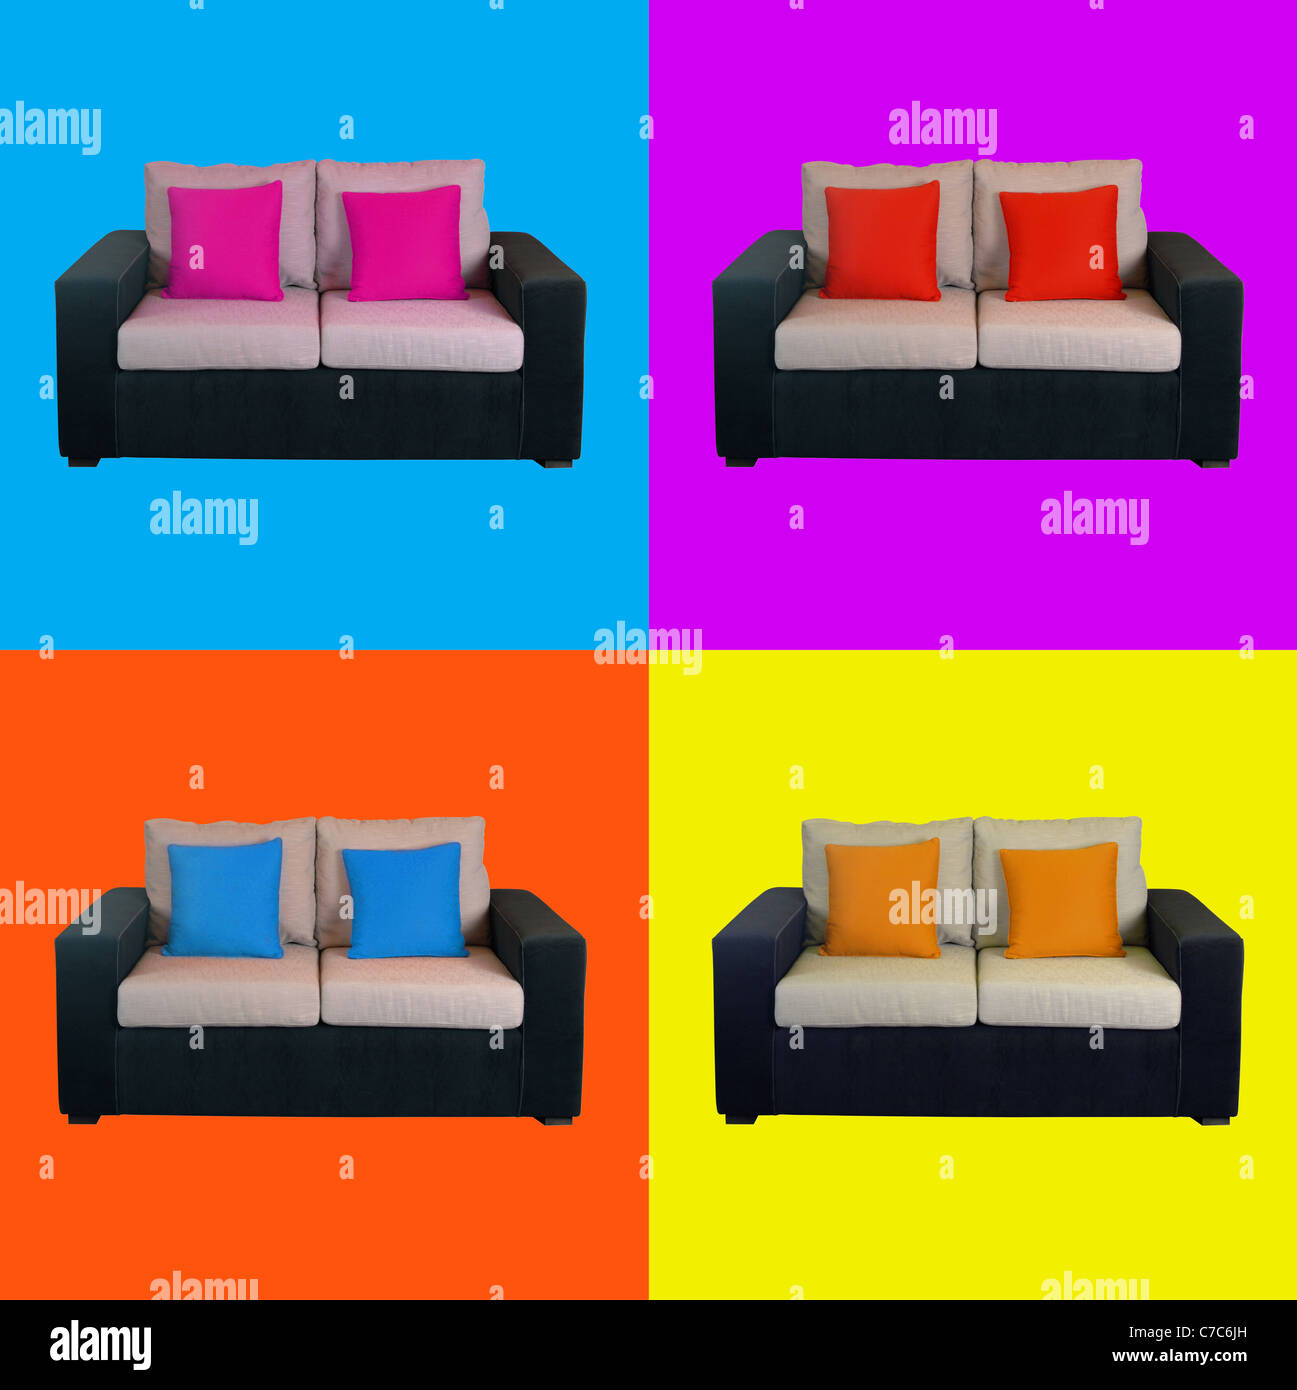 Design based on Warhol picture on different background colors. Vector available. Stock Photo